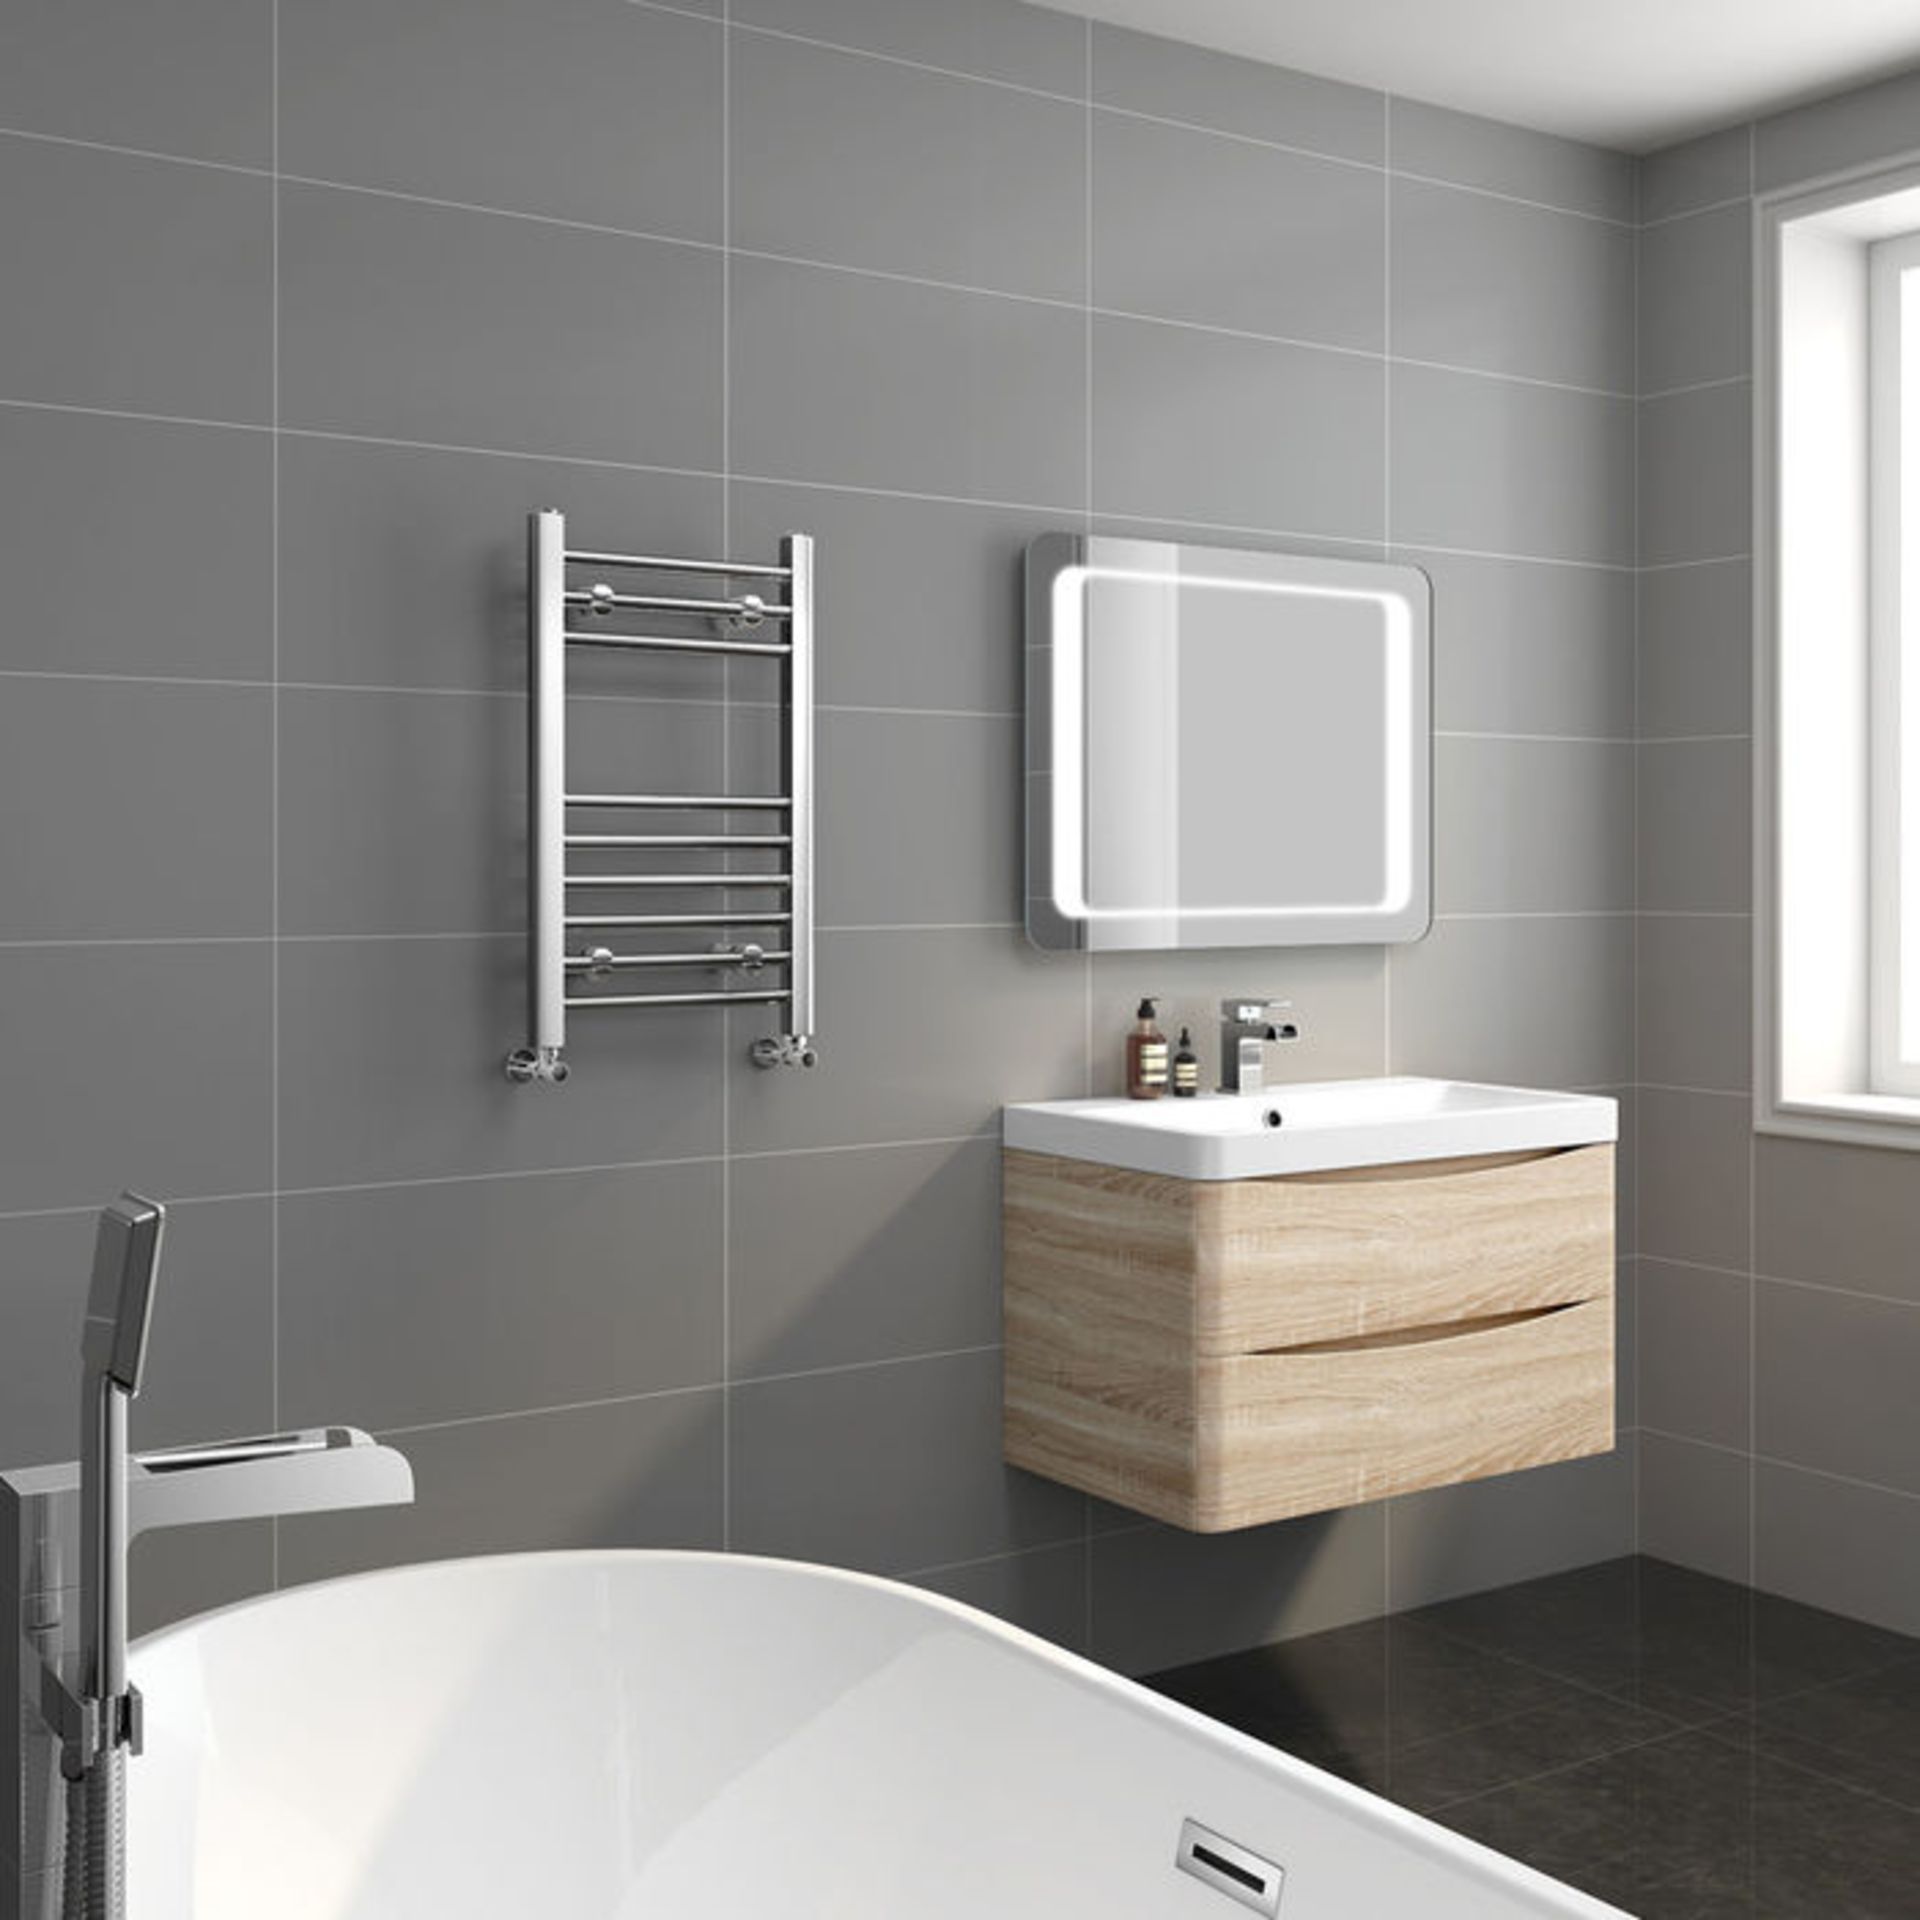 (H43) 650x400mm - Basic 20mm Tubes - Chrome Heated Straight Rail Ladder Towel Radiator Low carbon - Image 2 of 3